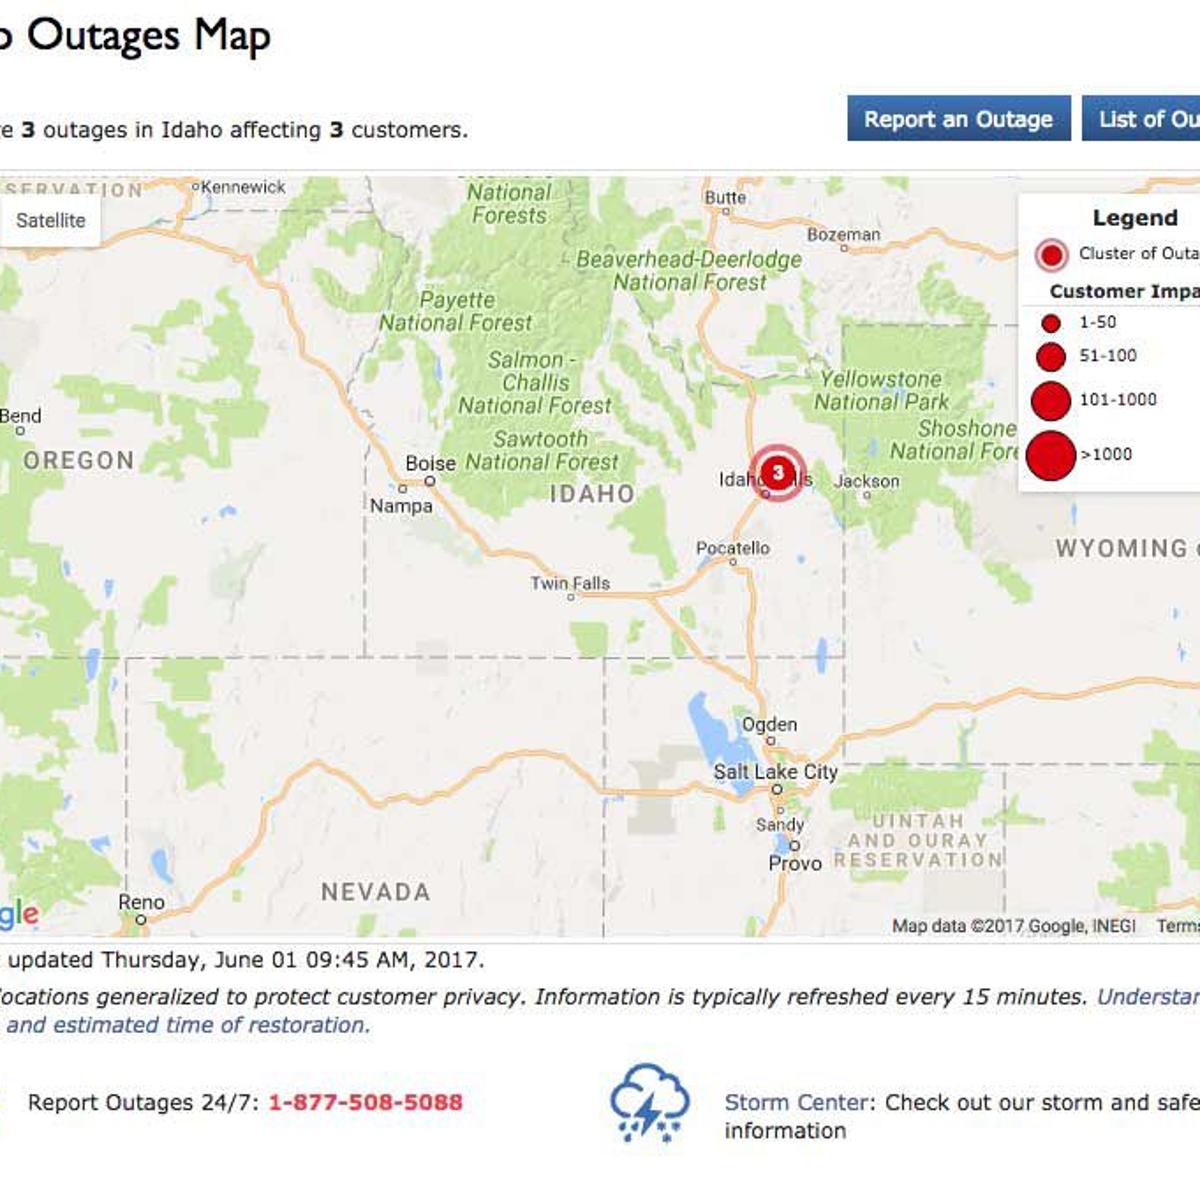 Rocky Mountain Power S New Online Outage Map Shows Where Power Is